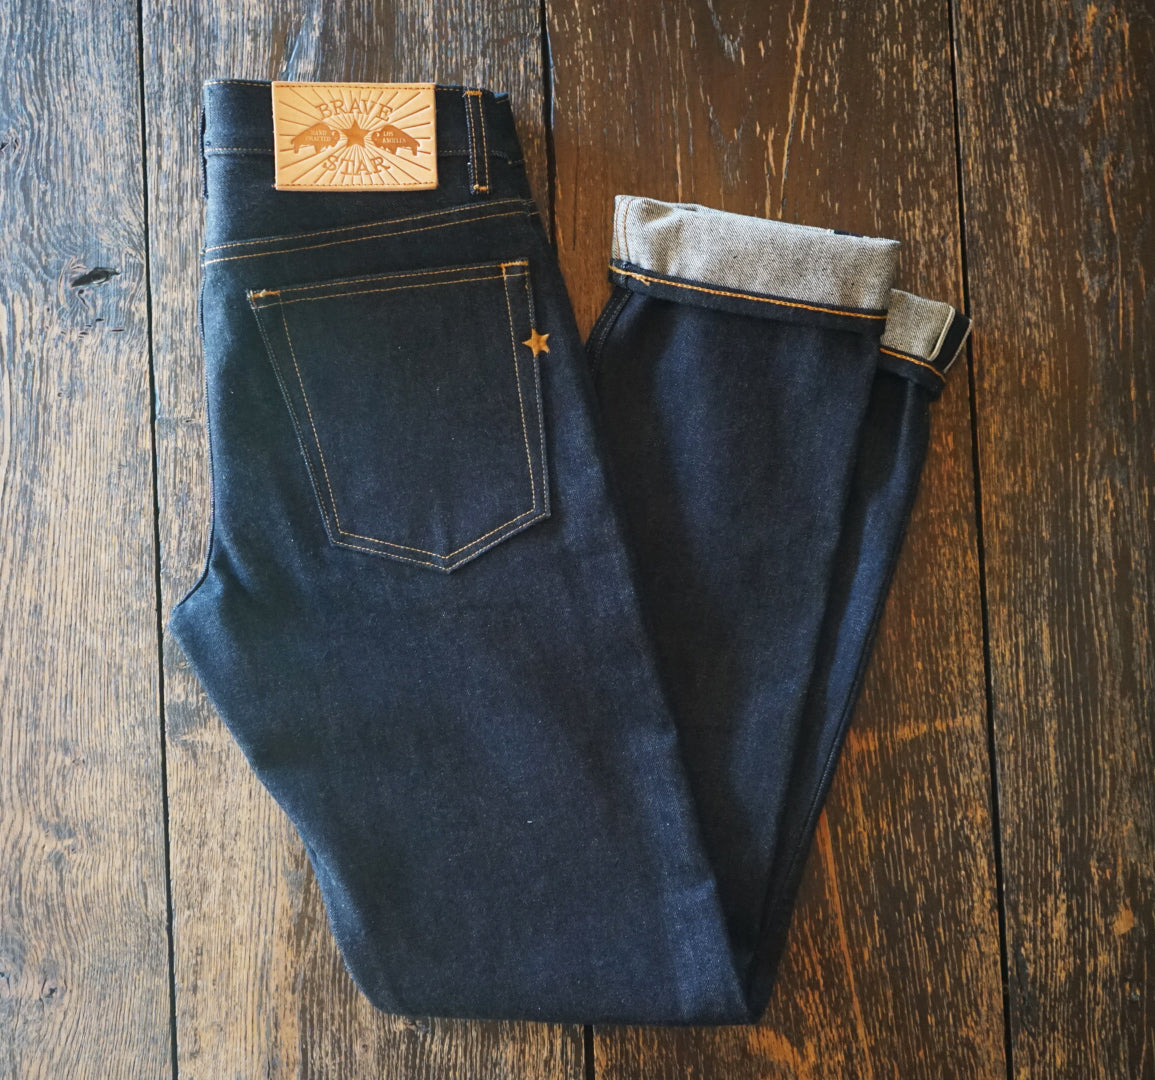 Jeans, Brave Star Selvage Jeans